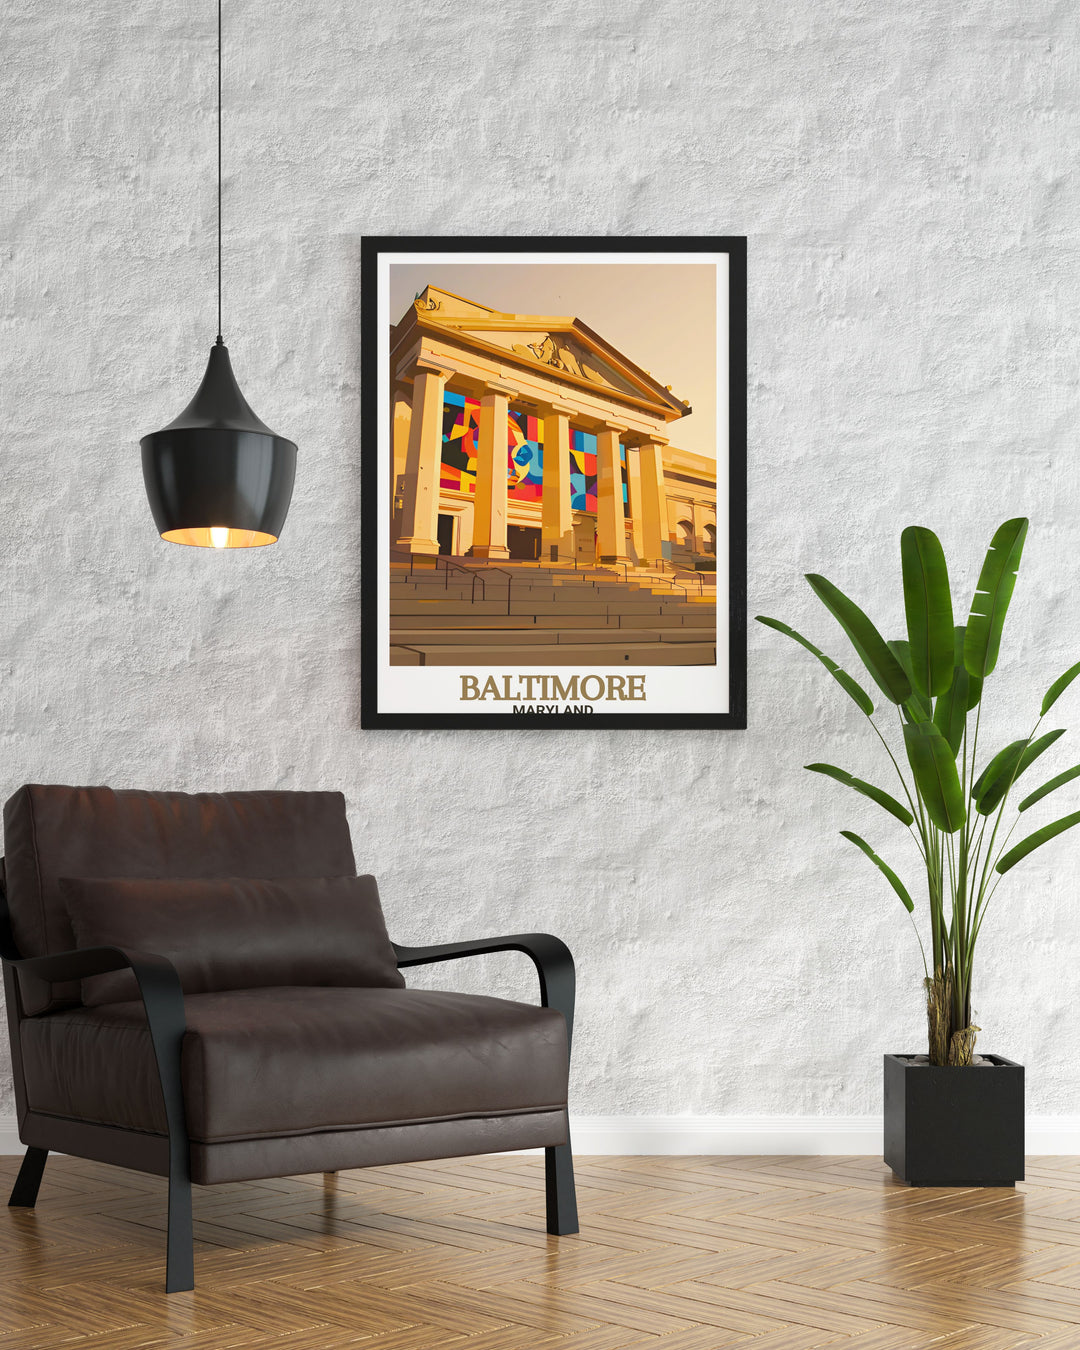 Sophisticated Baltimore Museum of Art home decor piece displaying a detailed street map of Baltimore this matted art print offers a stylish and meaningful addition to any wall perfect for art lovers and city enthusiasts